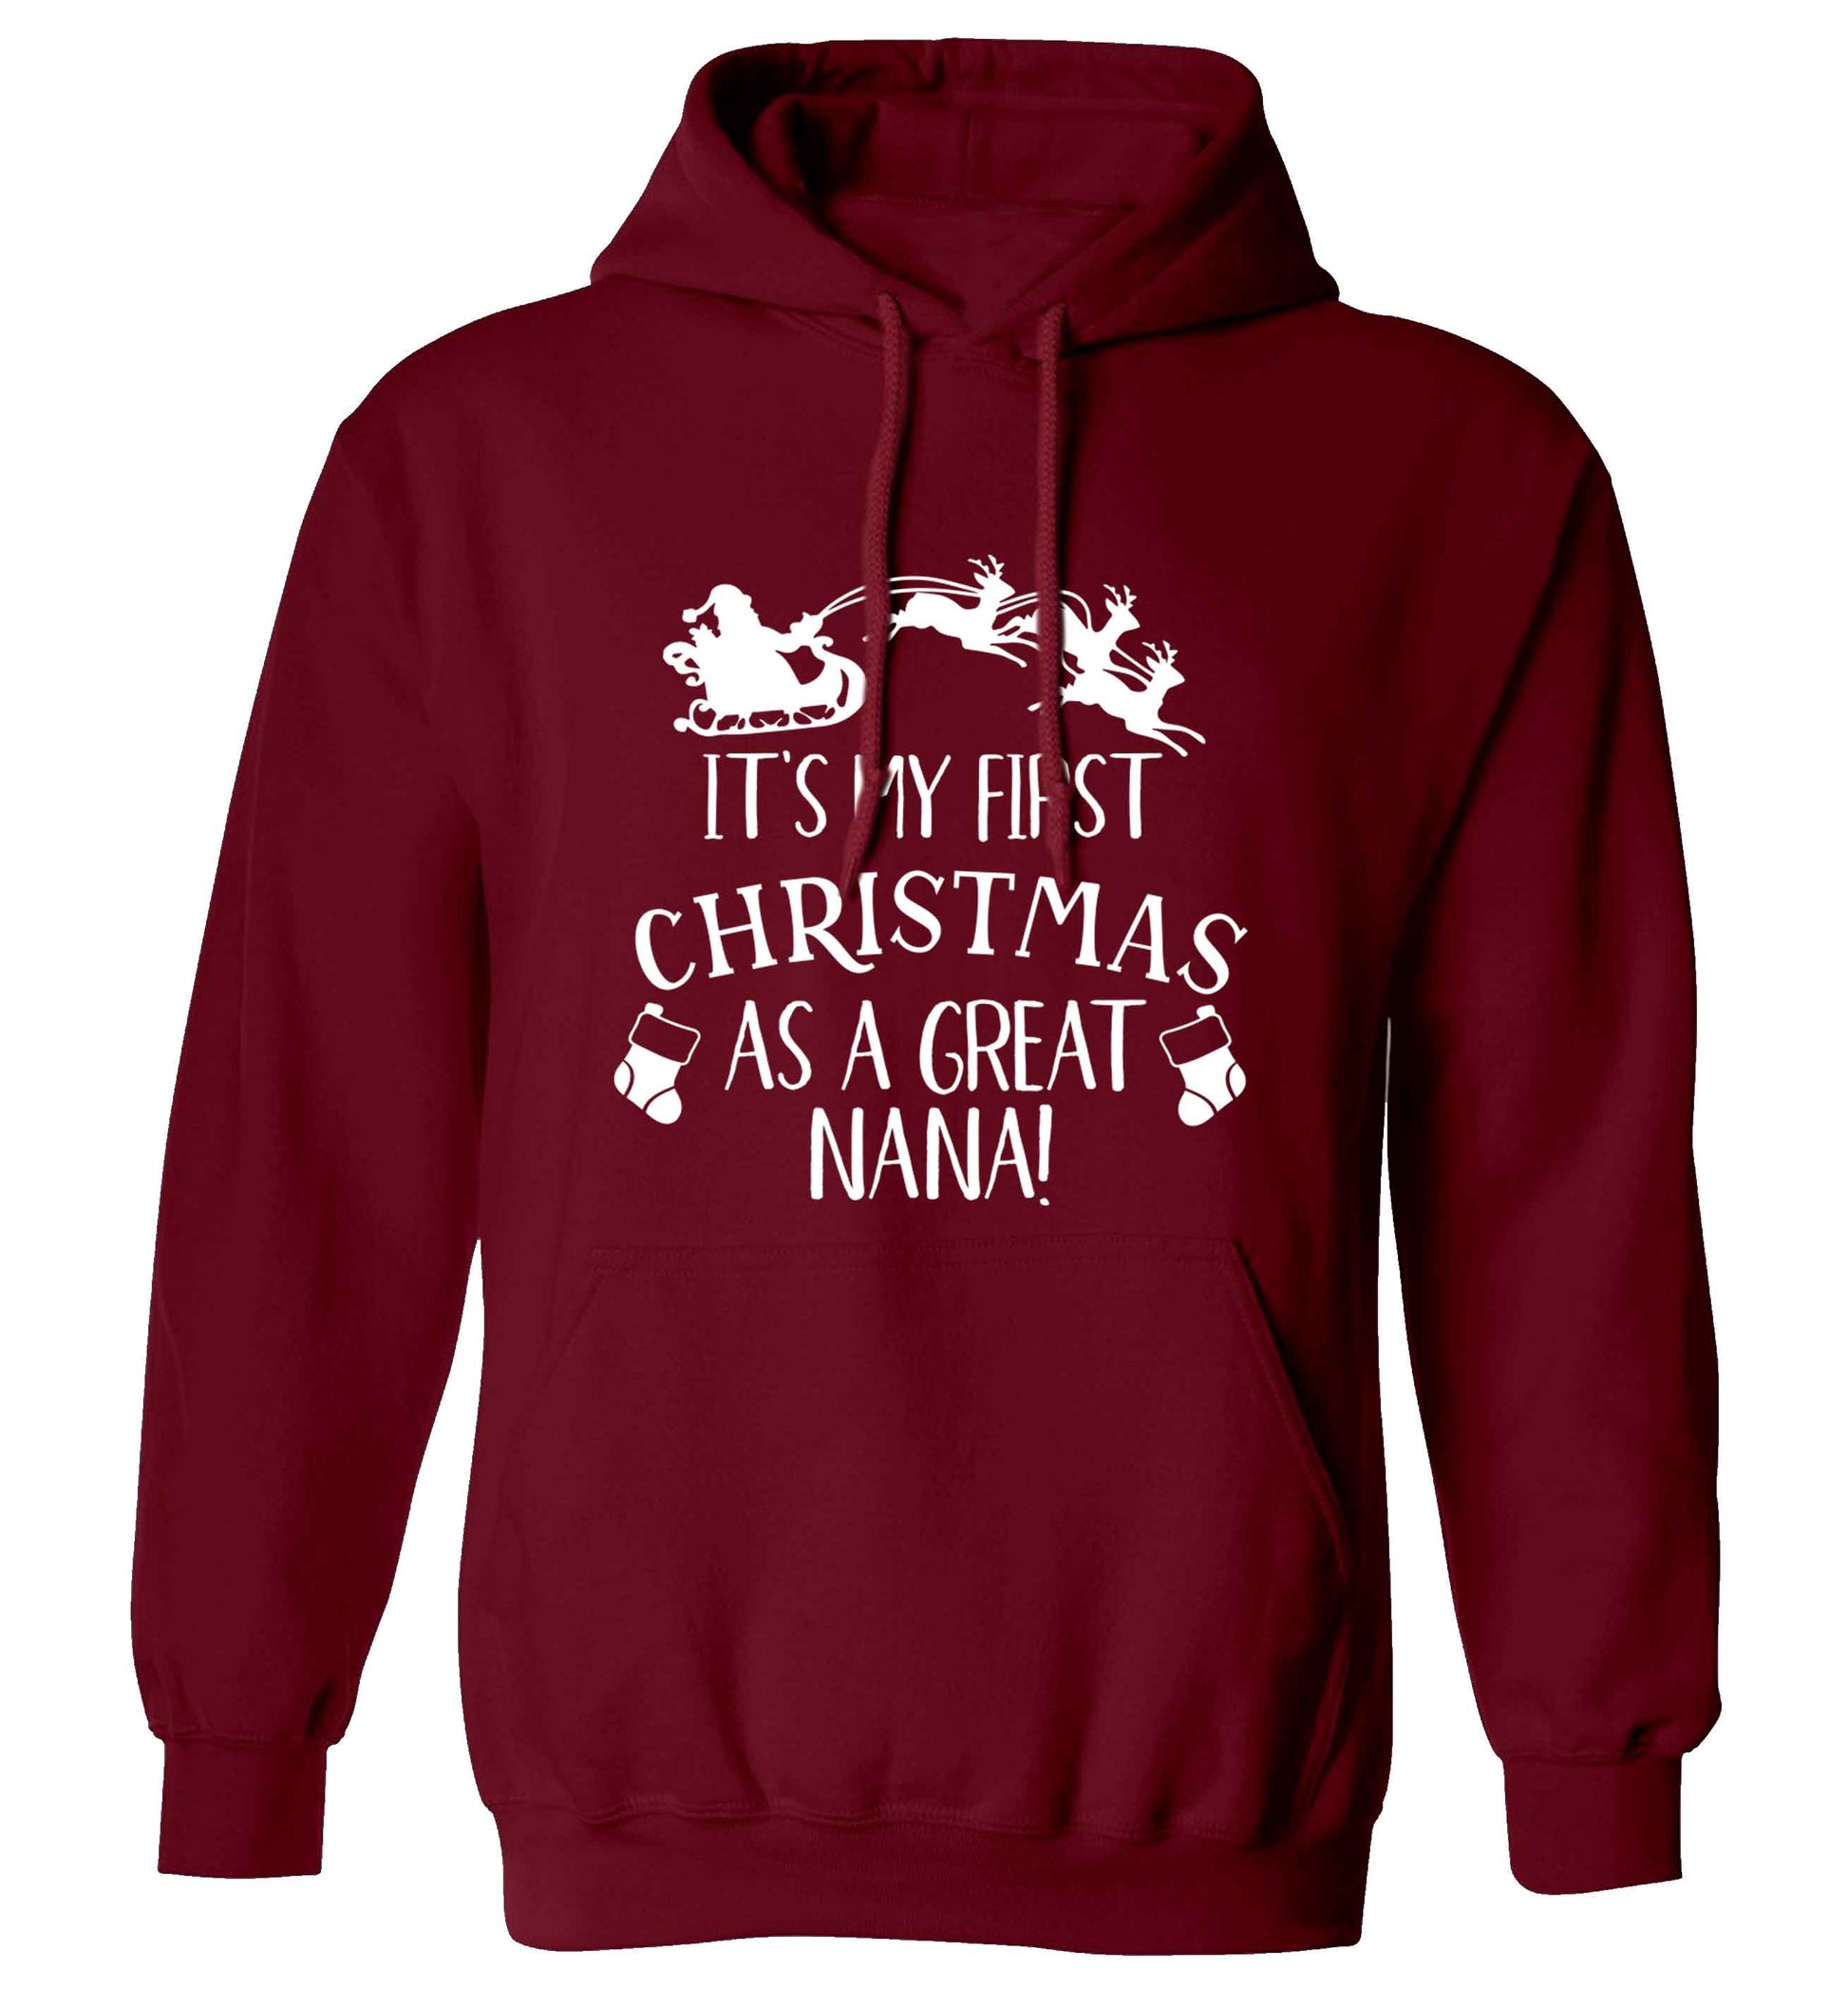 It's my first Christmas as a great nana! adults unisex maroon hoodie 2XL